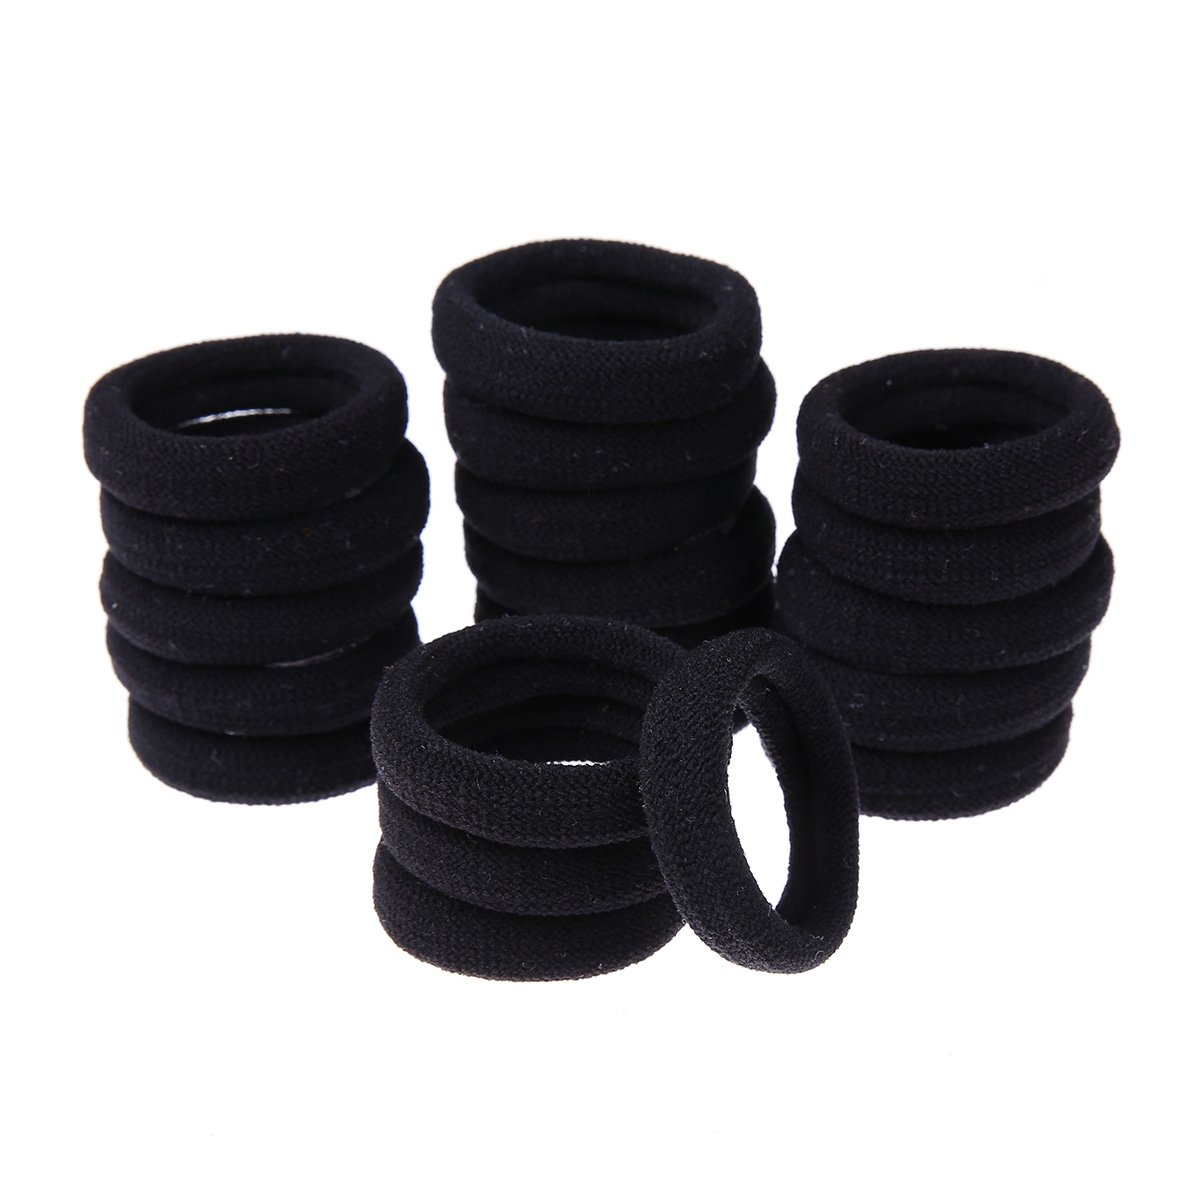 Black Rubber Band Buy Fashion Accessories Upto 70%Off